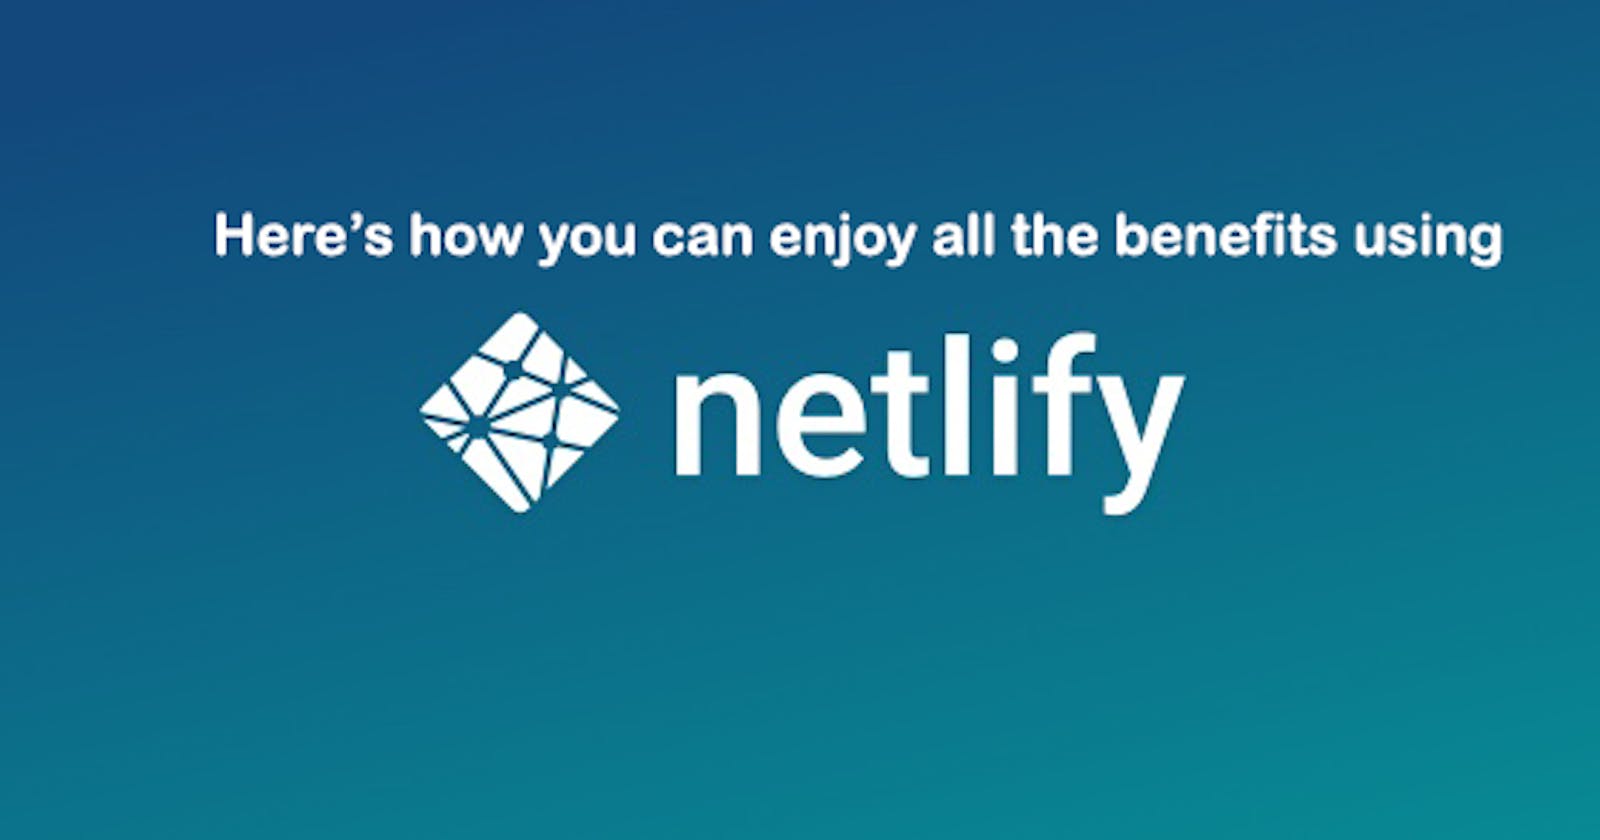 Here's how you can enjoy all the benefits of using Netlify.